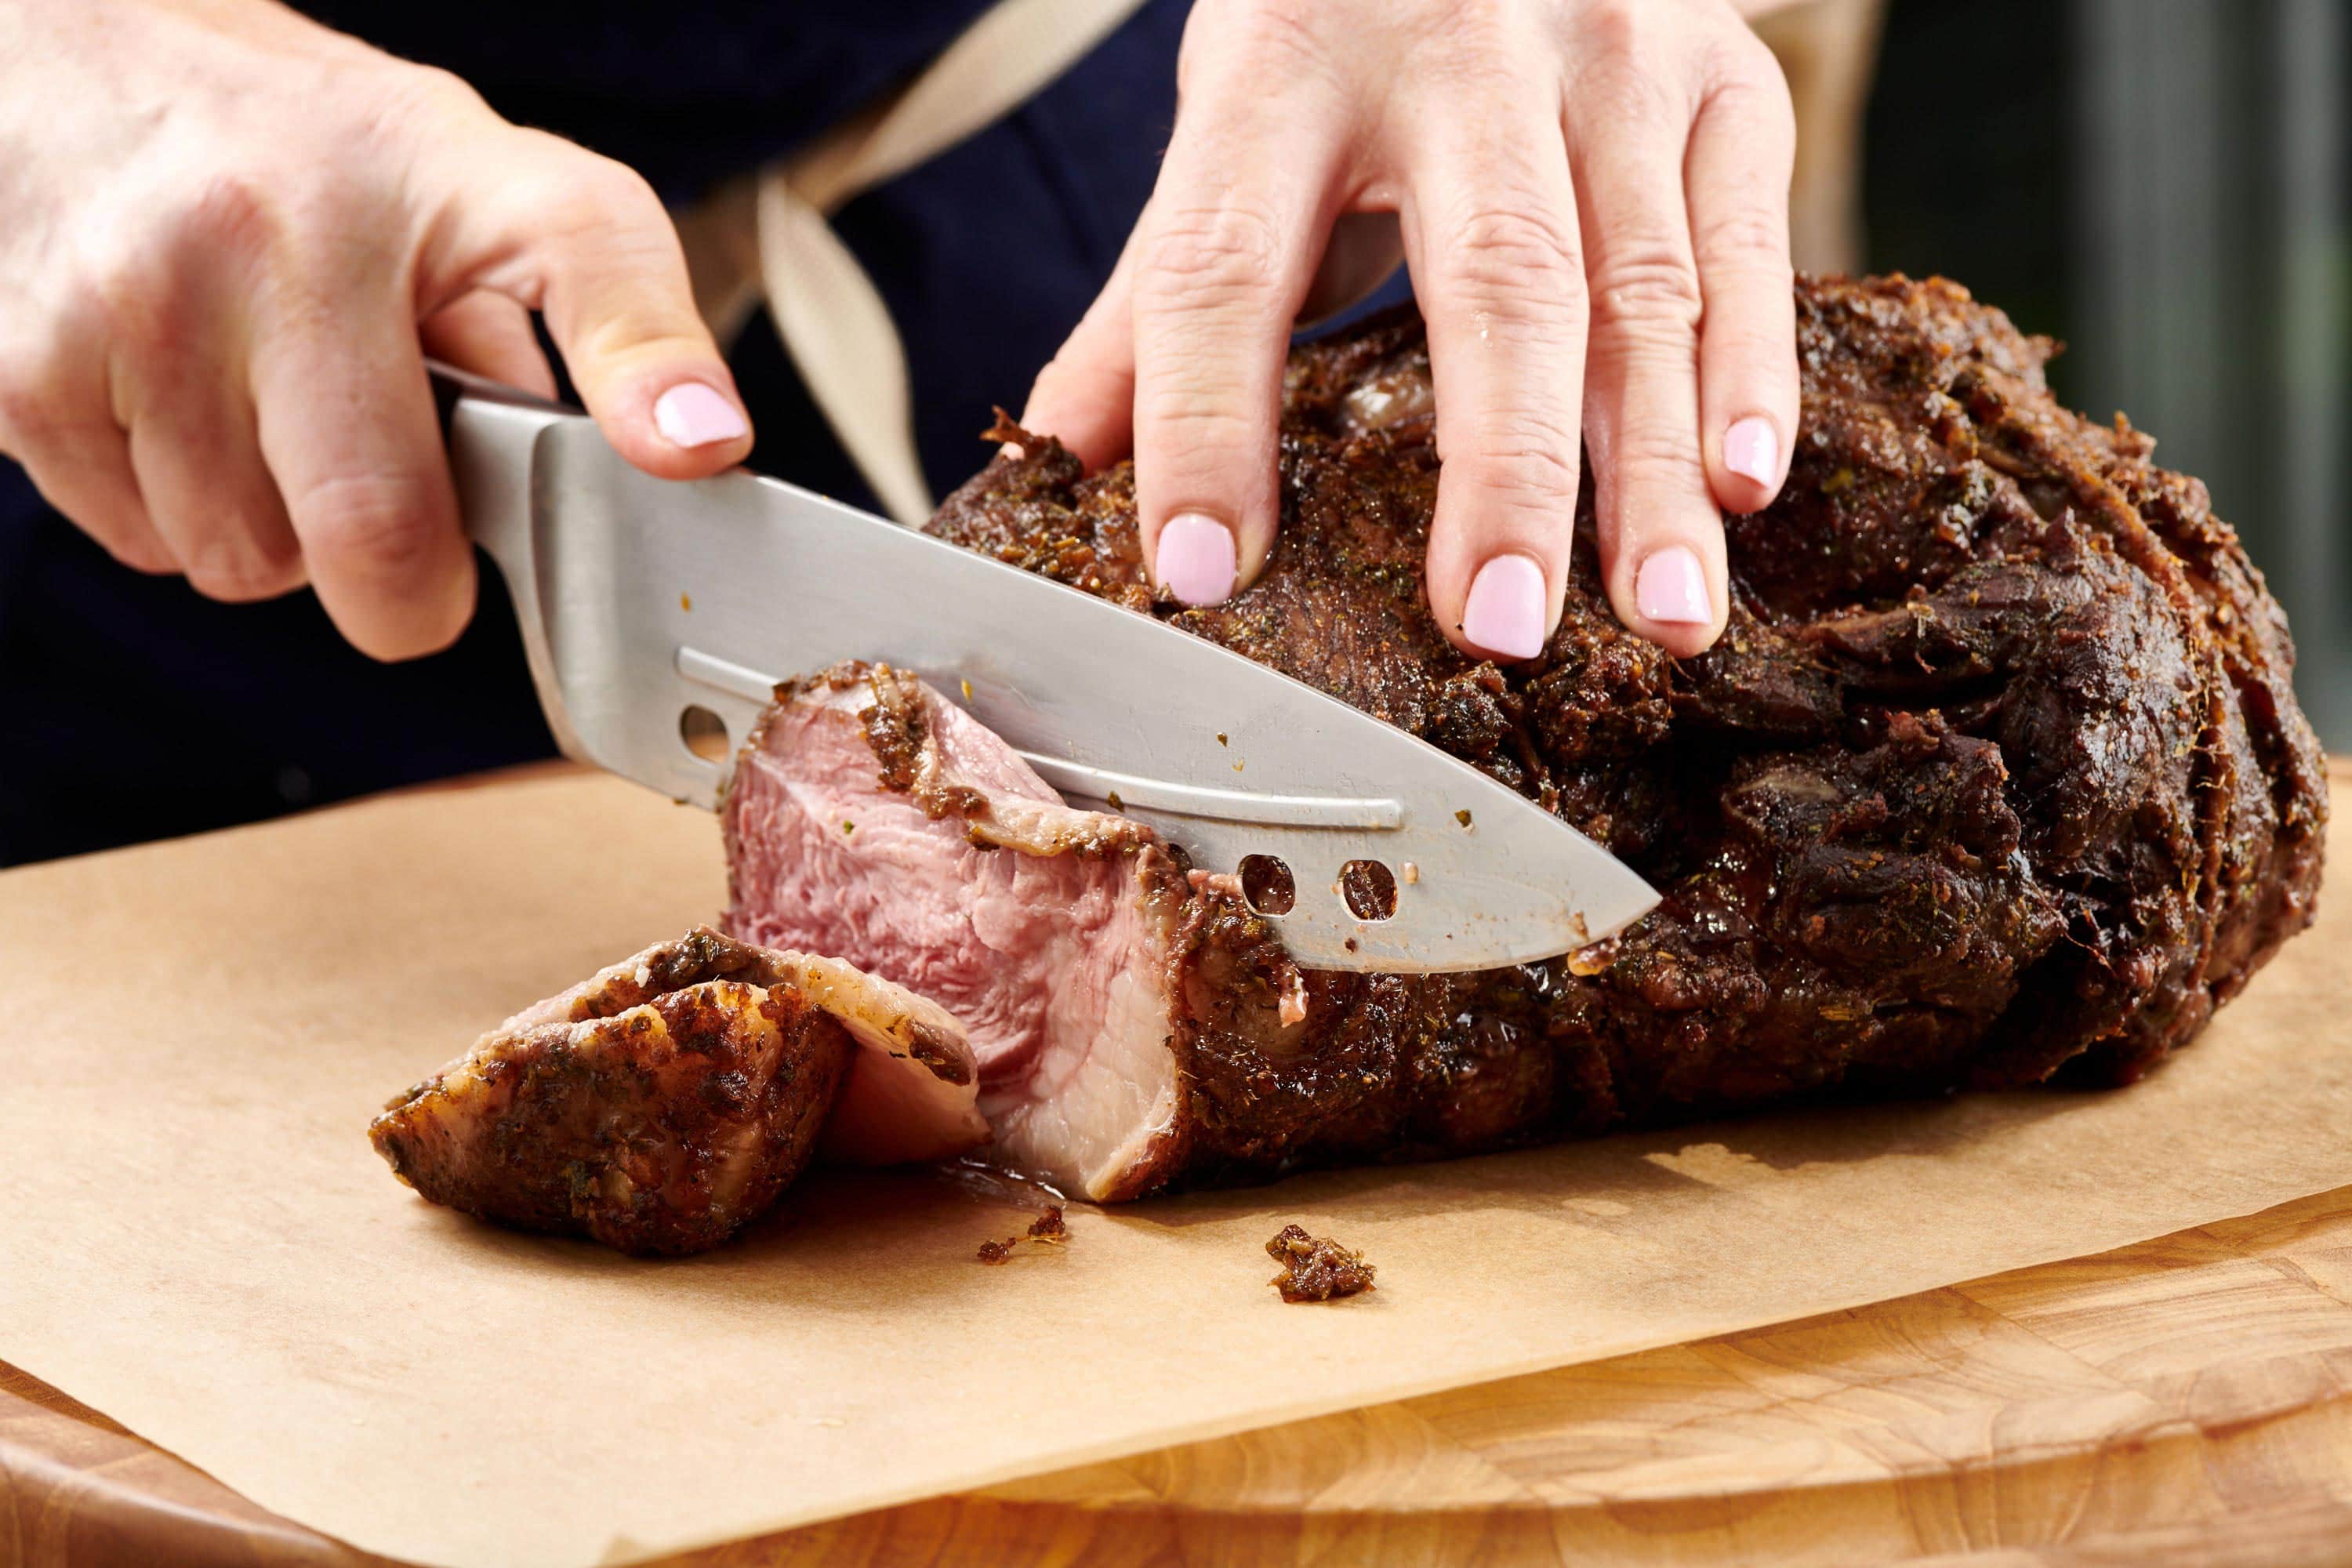 Woman slicing a Moroccan Leg of Lamb with a knife.